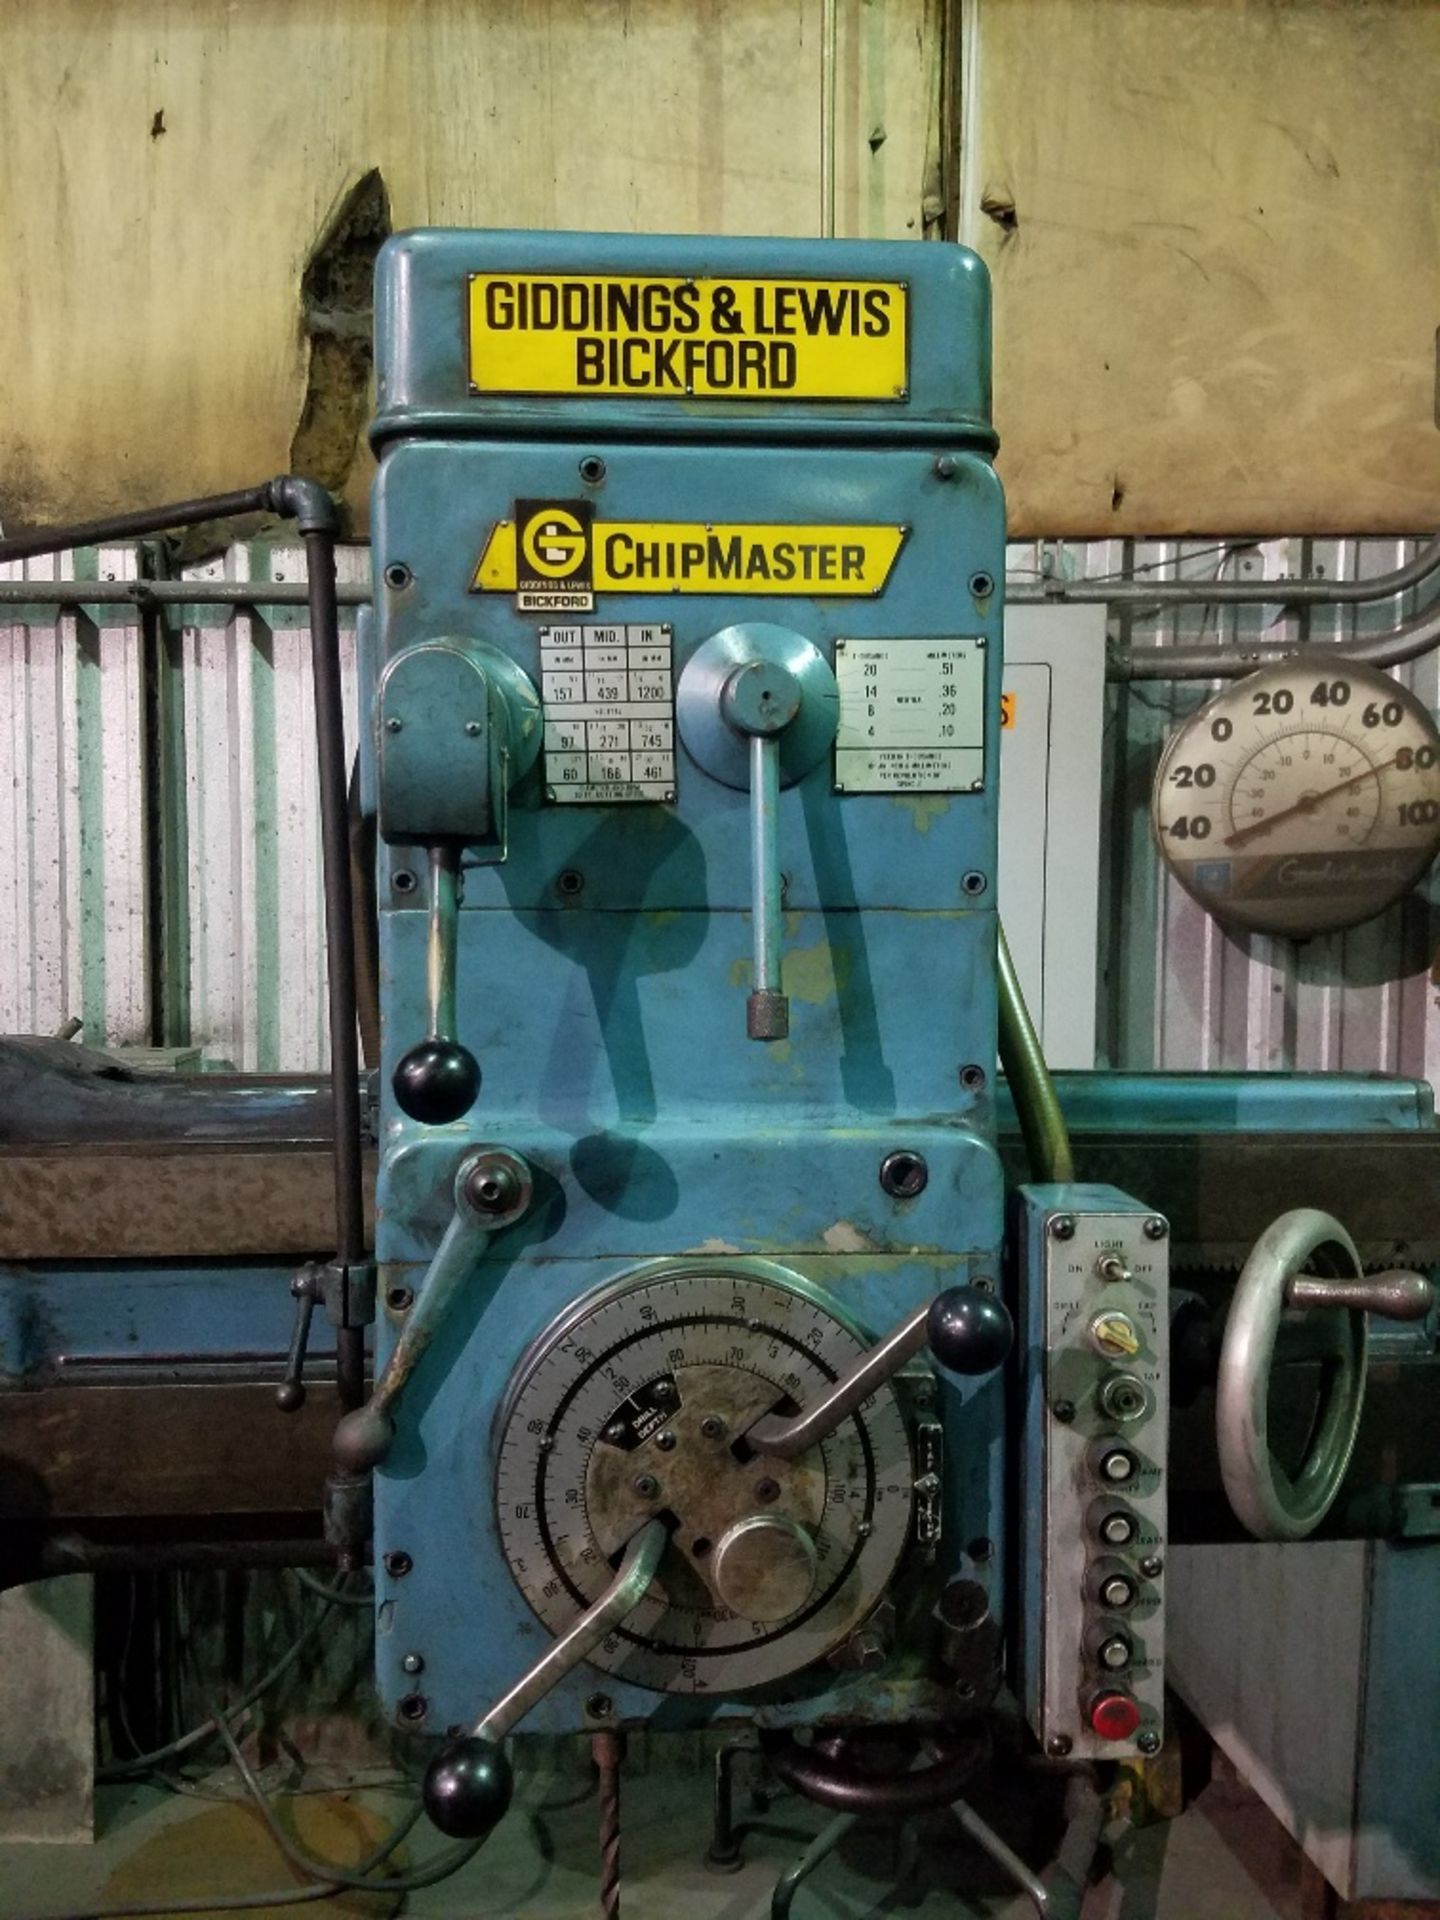 3’ x 9” GIDDINGS & LEWIS BICKFORD RADIAL ARM DRILL, Chipmaster, S/N 951-00565-74. (Location R: - Image 2 of 3